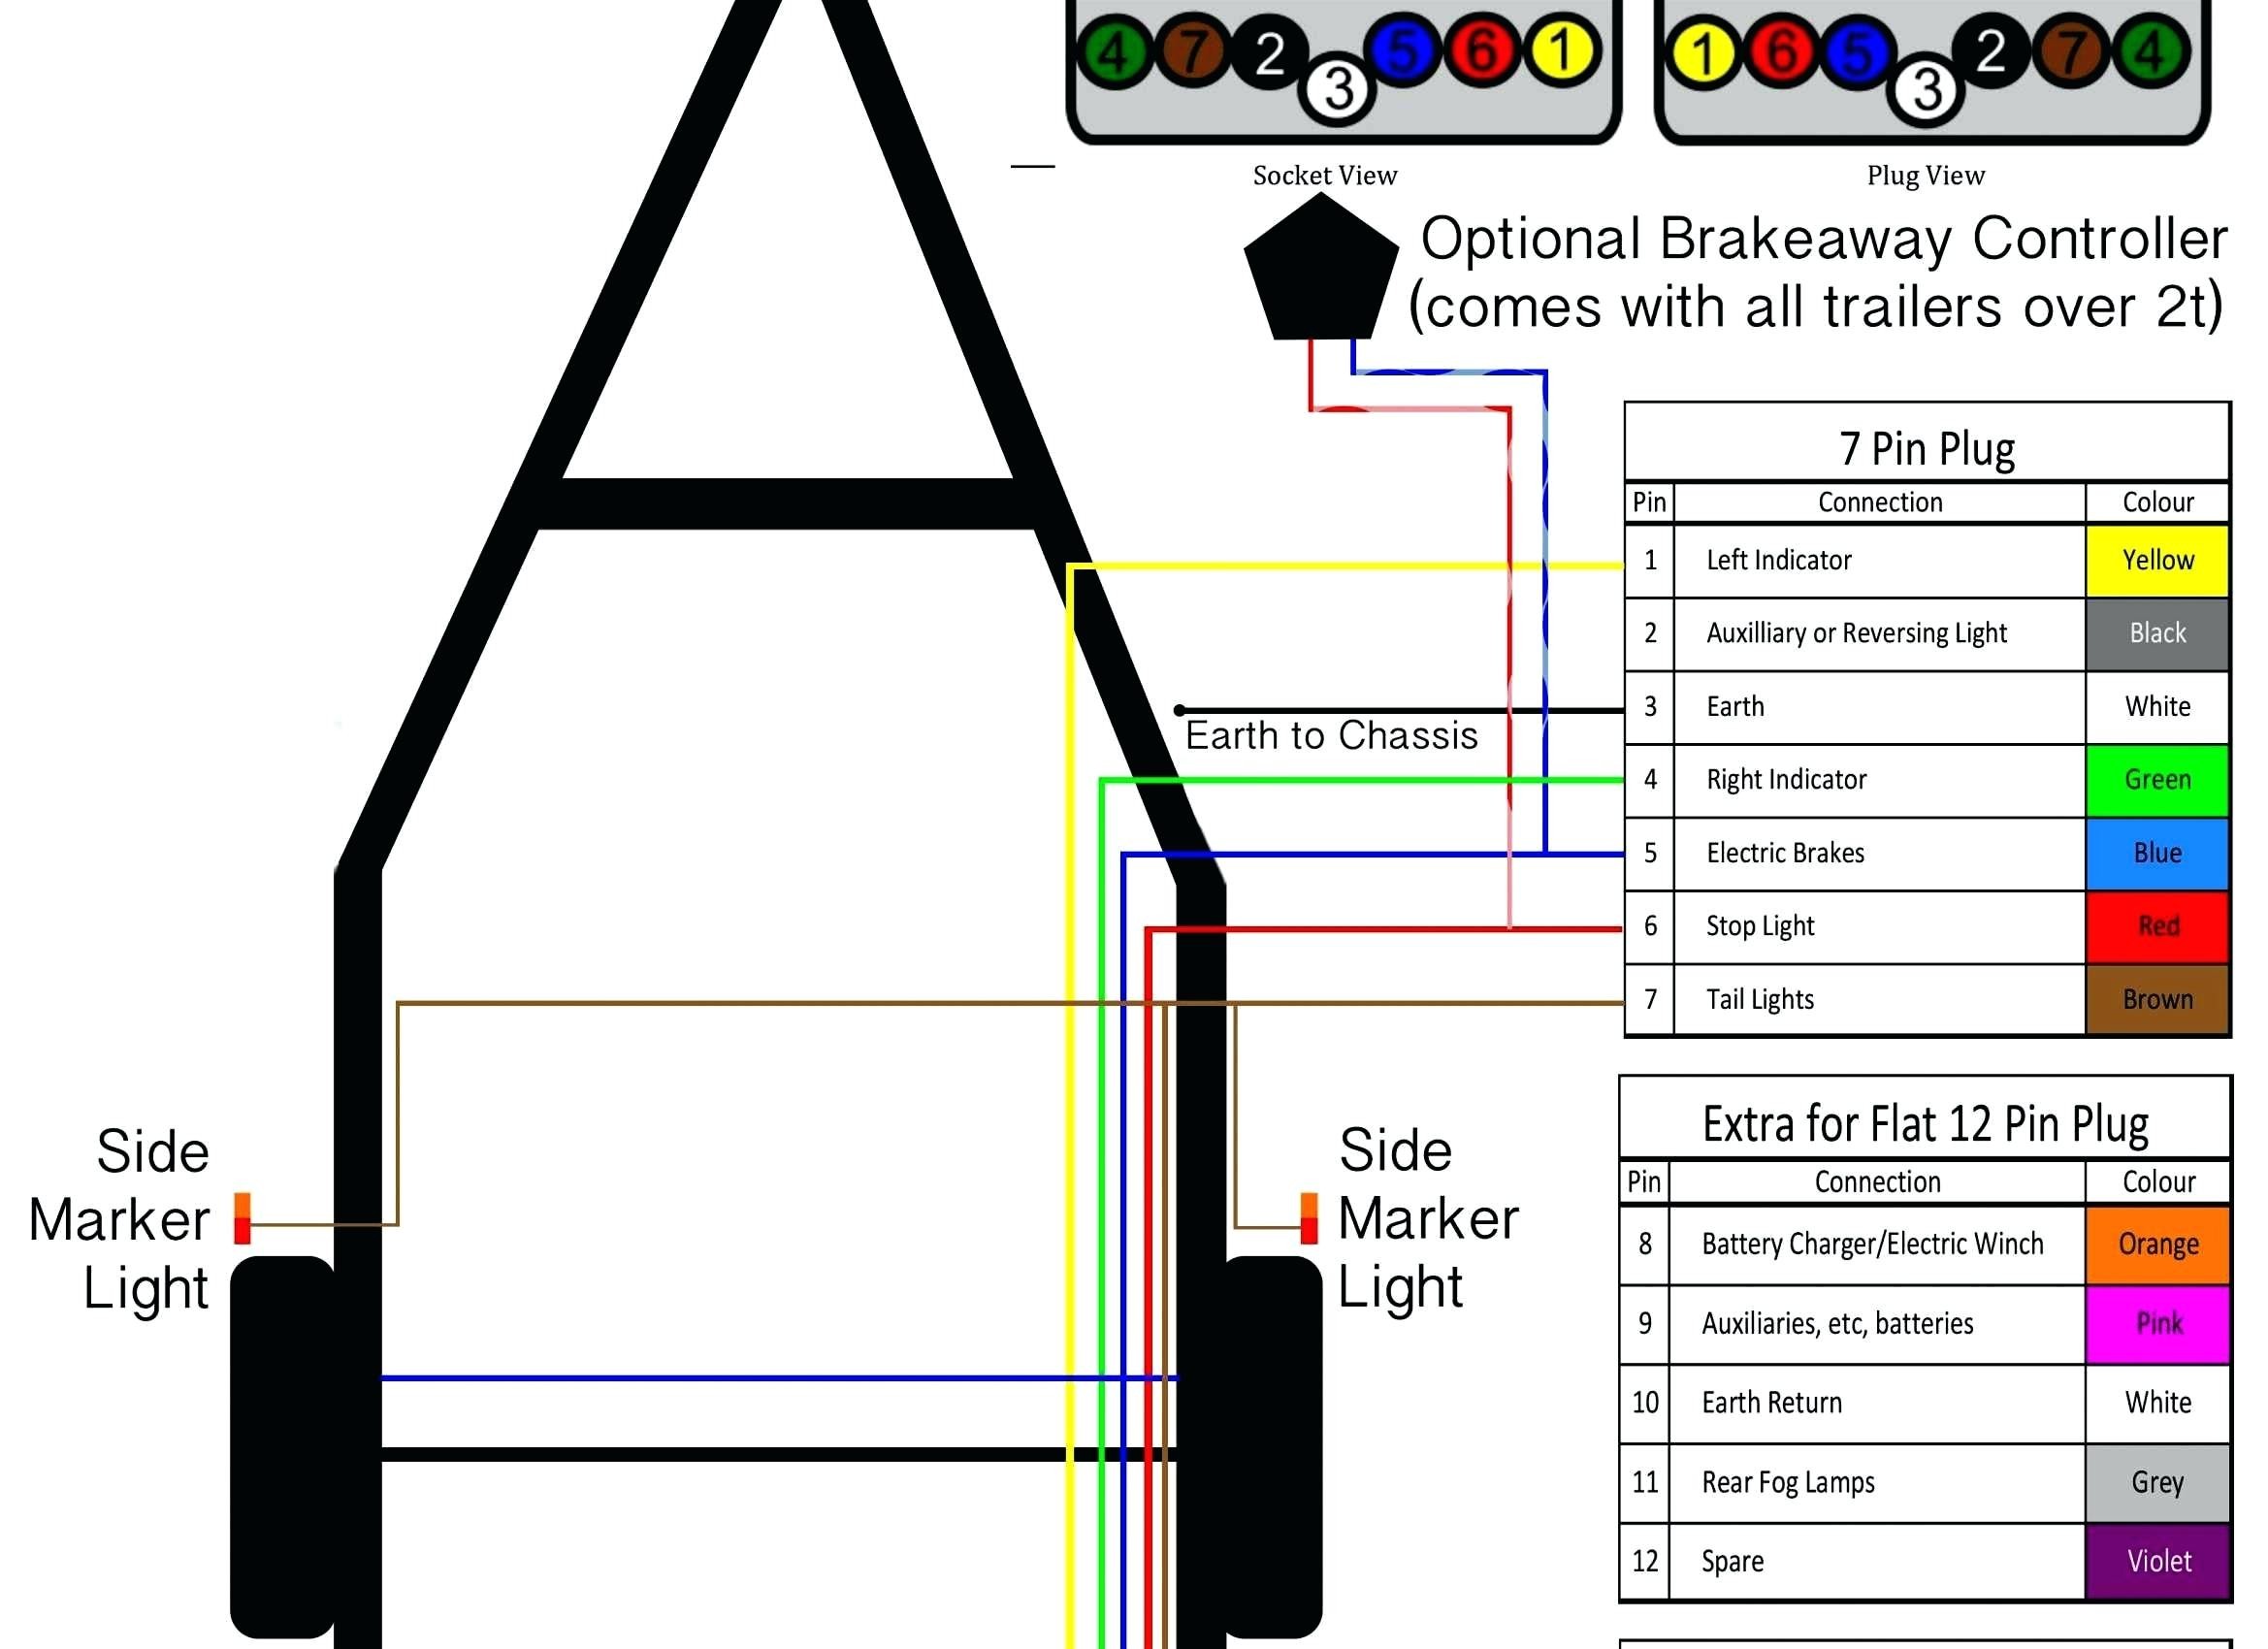 Full Size of Pj Trailer Brake Wiring Diagram 7 Pin Archived Wiring Diagram Category With